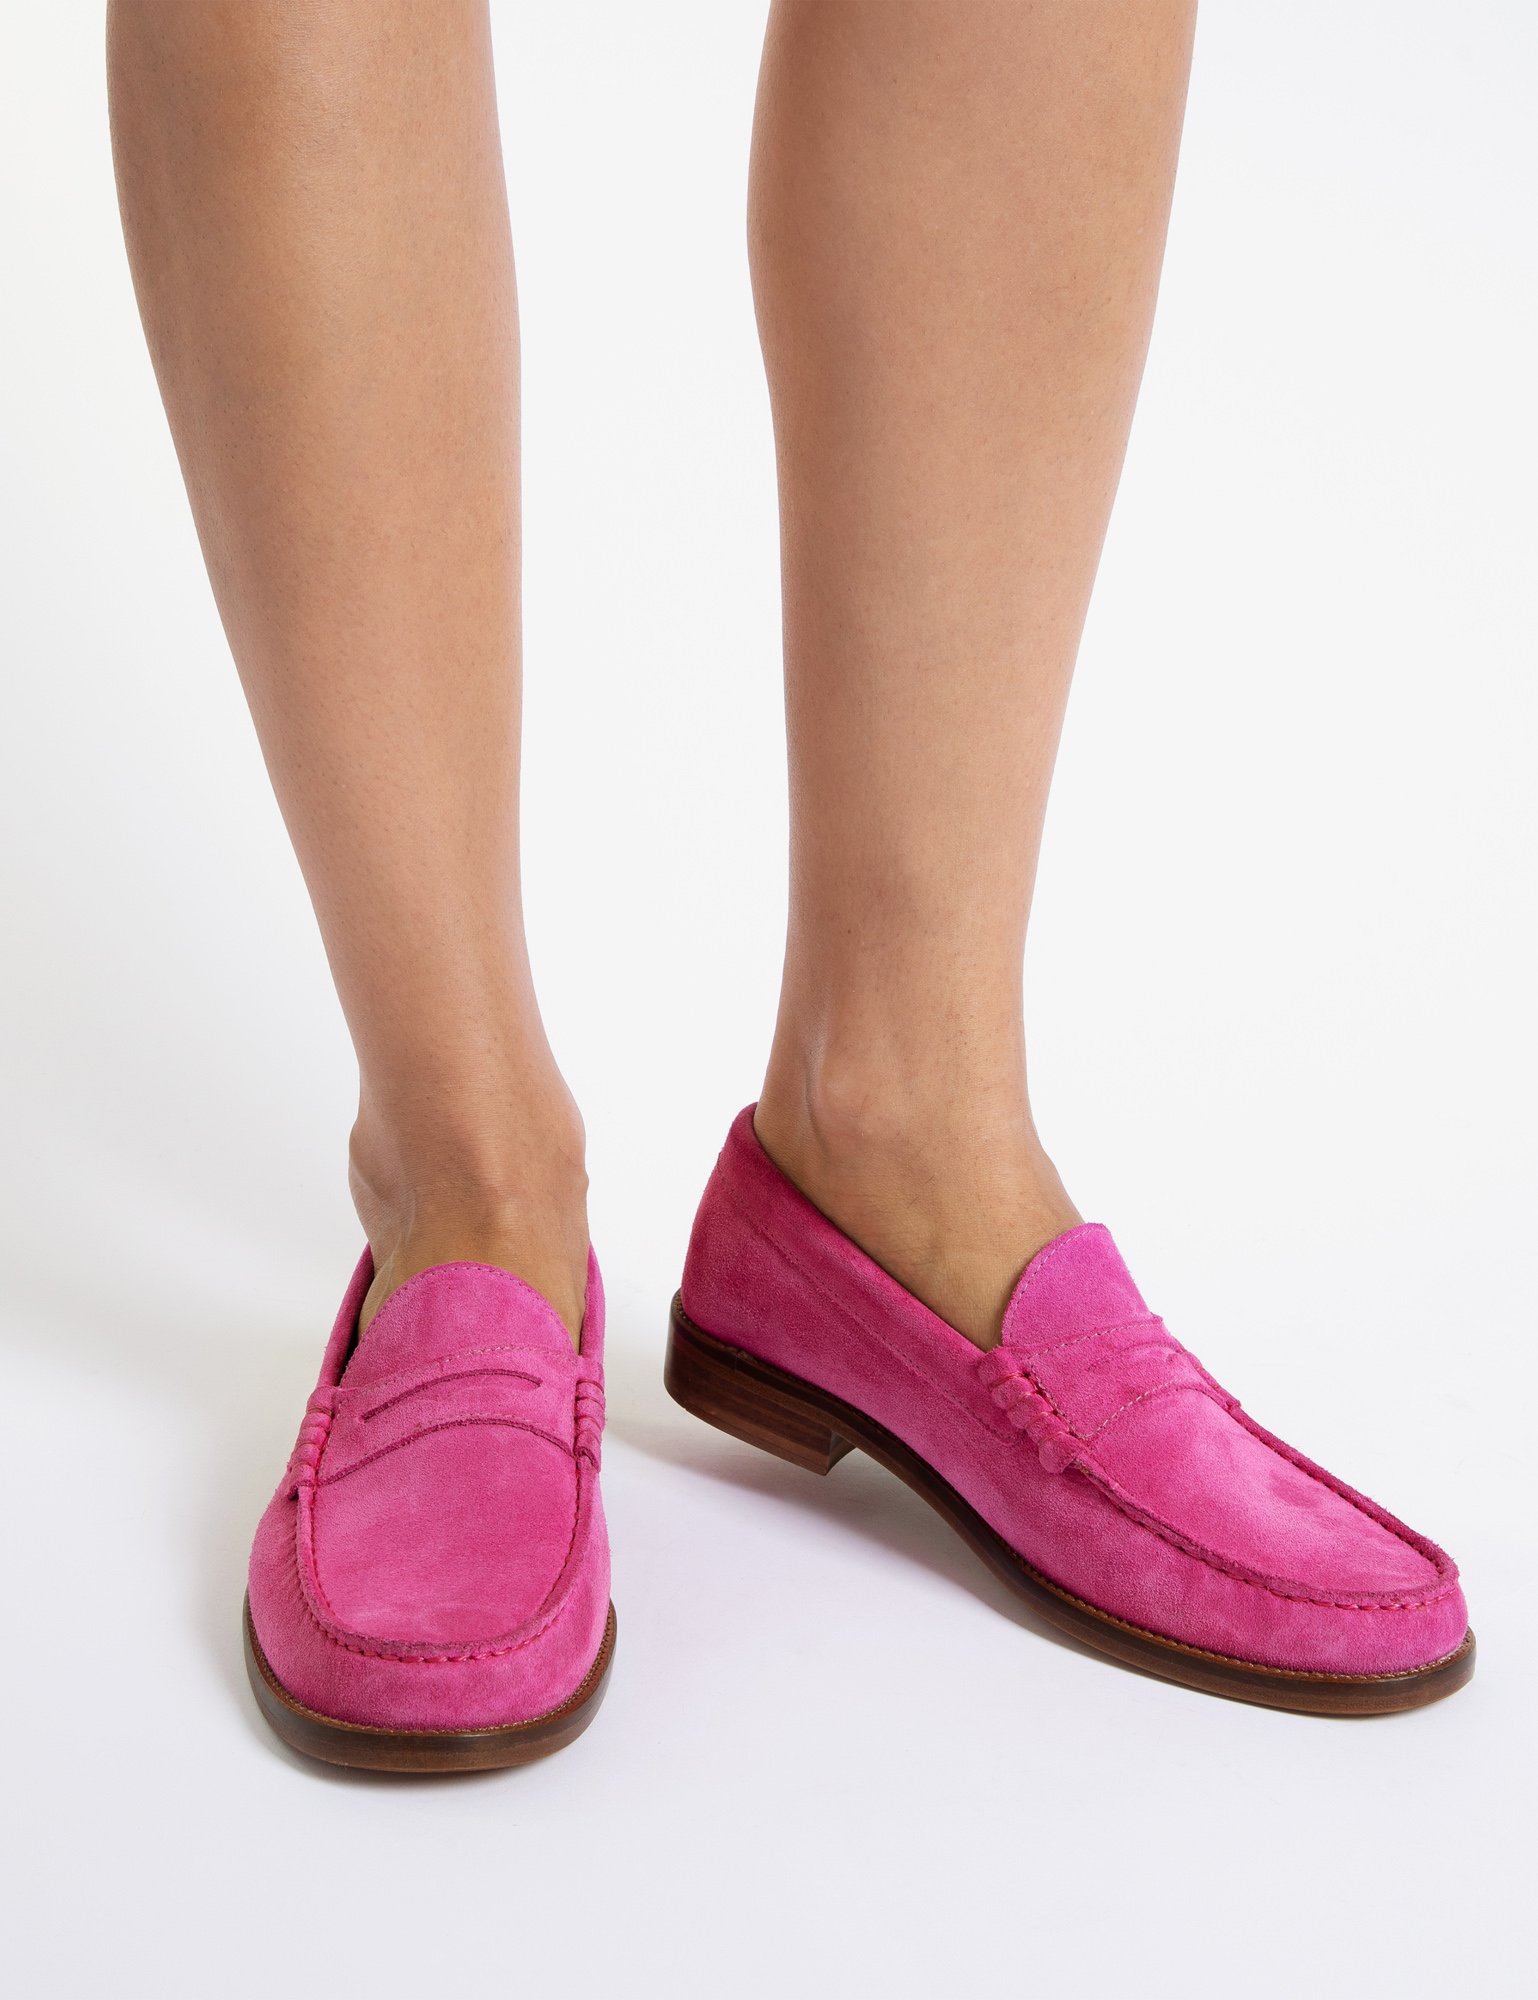 Loafer Suede Shoe - Fuchsia | Women's Shoes | Penelope Chilvers